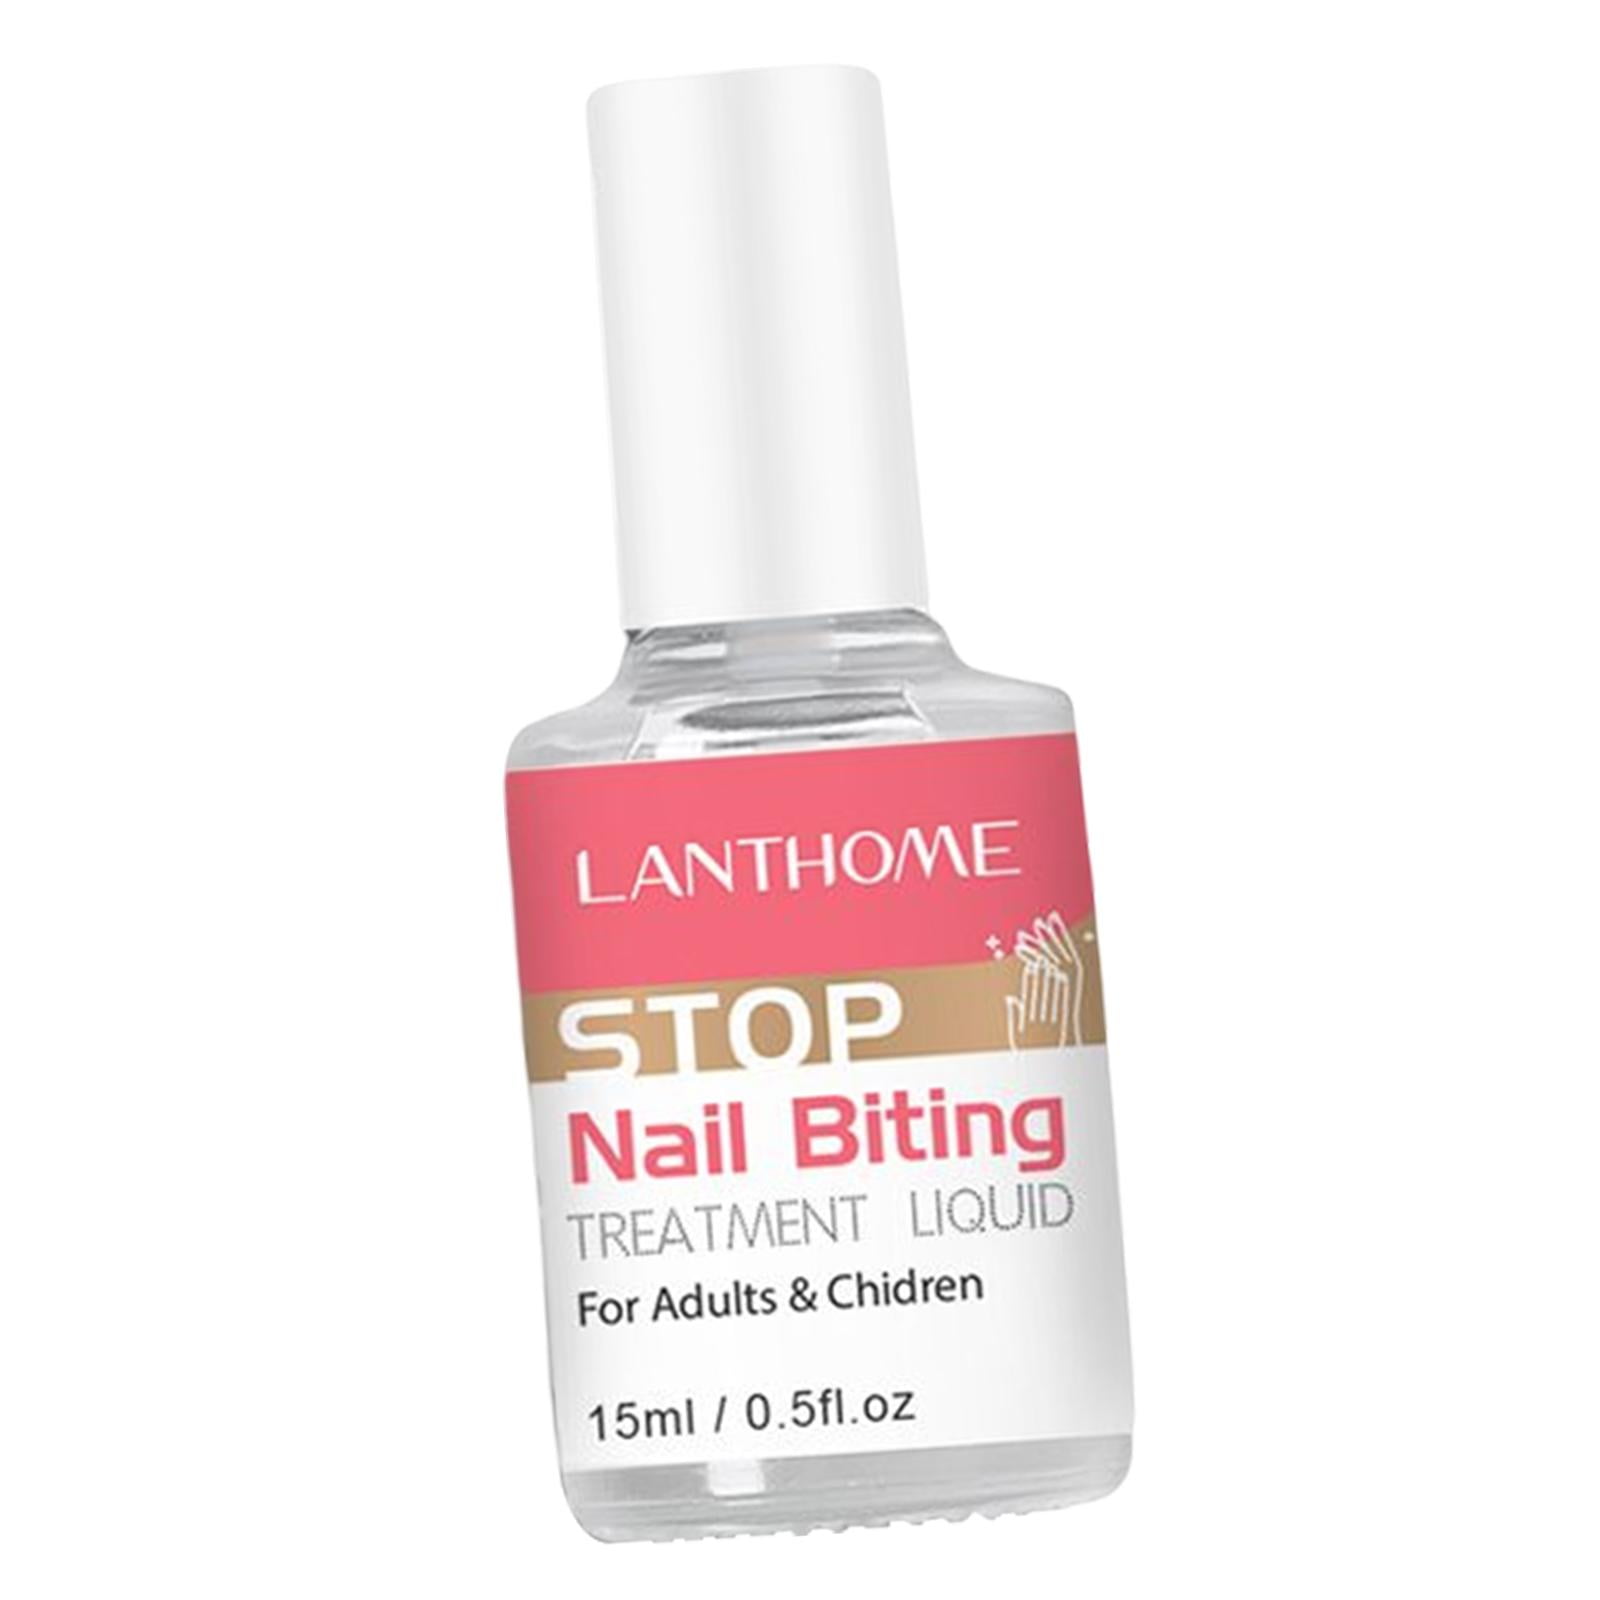 5 Tips on How To Stop Nail Biting